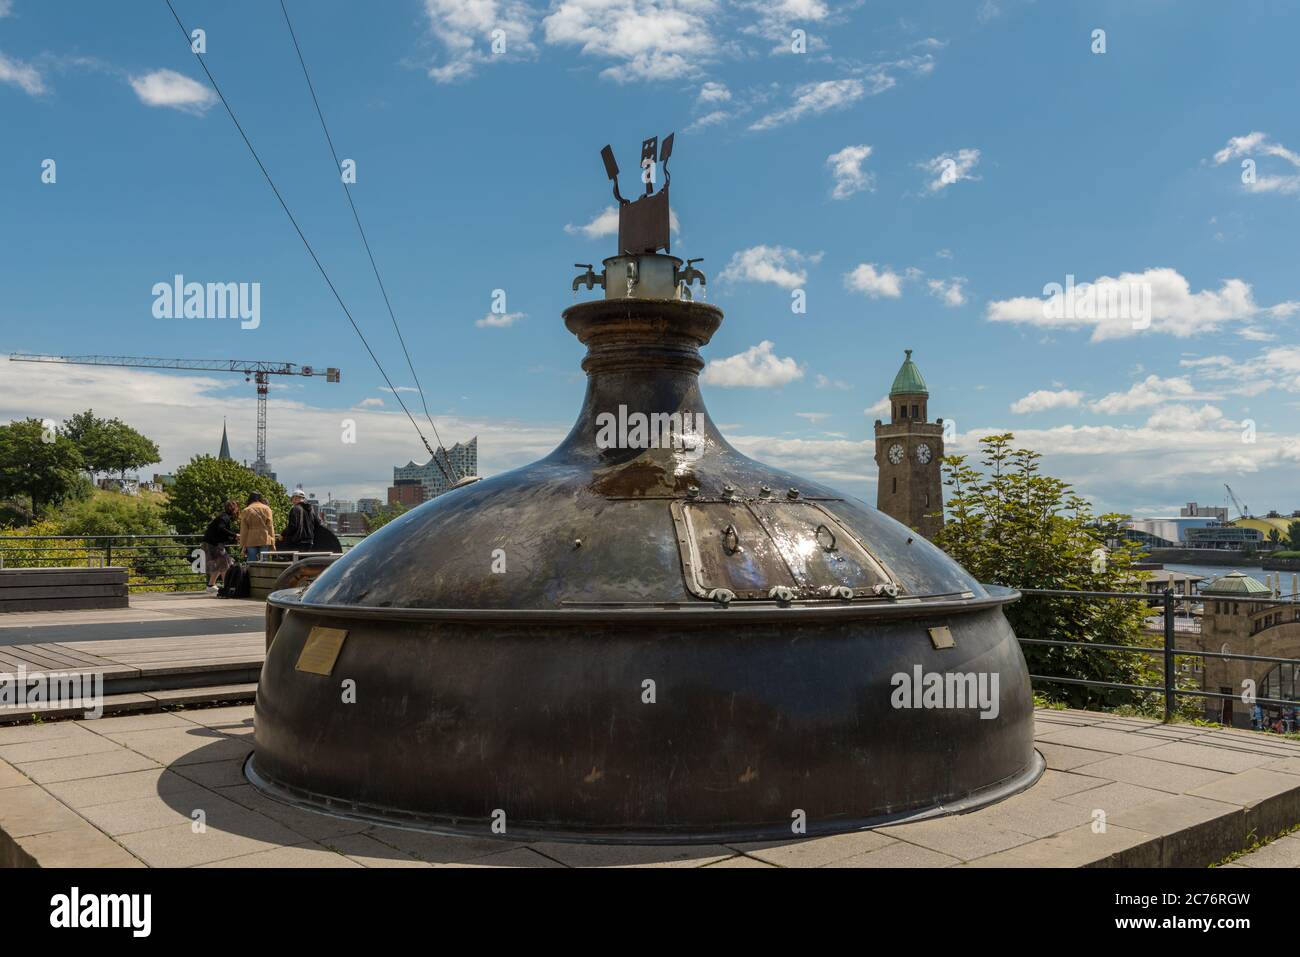 old brewing kettle converted to a fountain, Hamburg, Germany Stock Photo